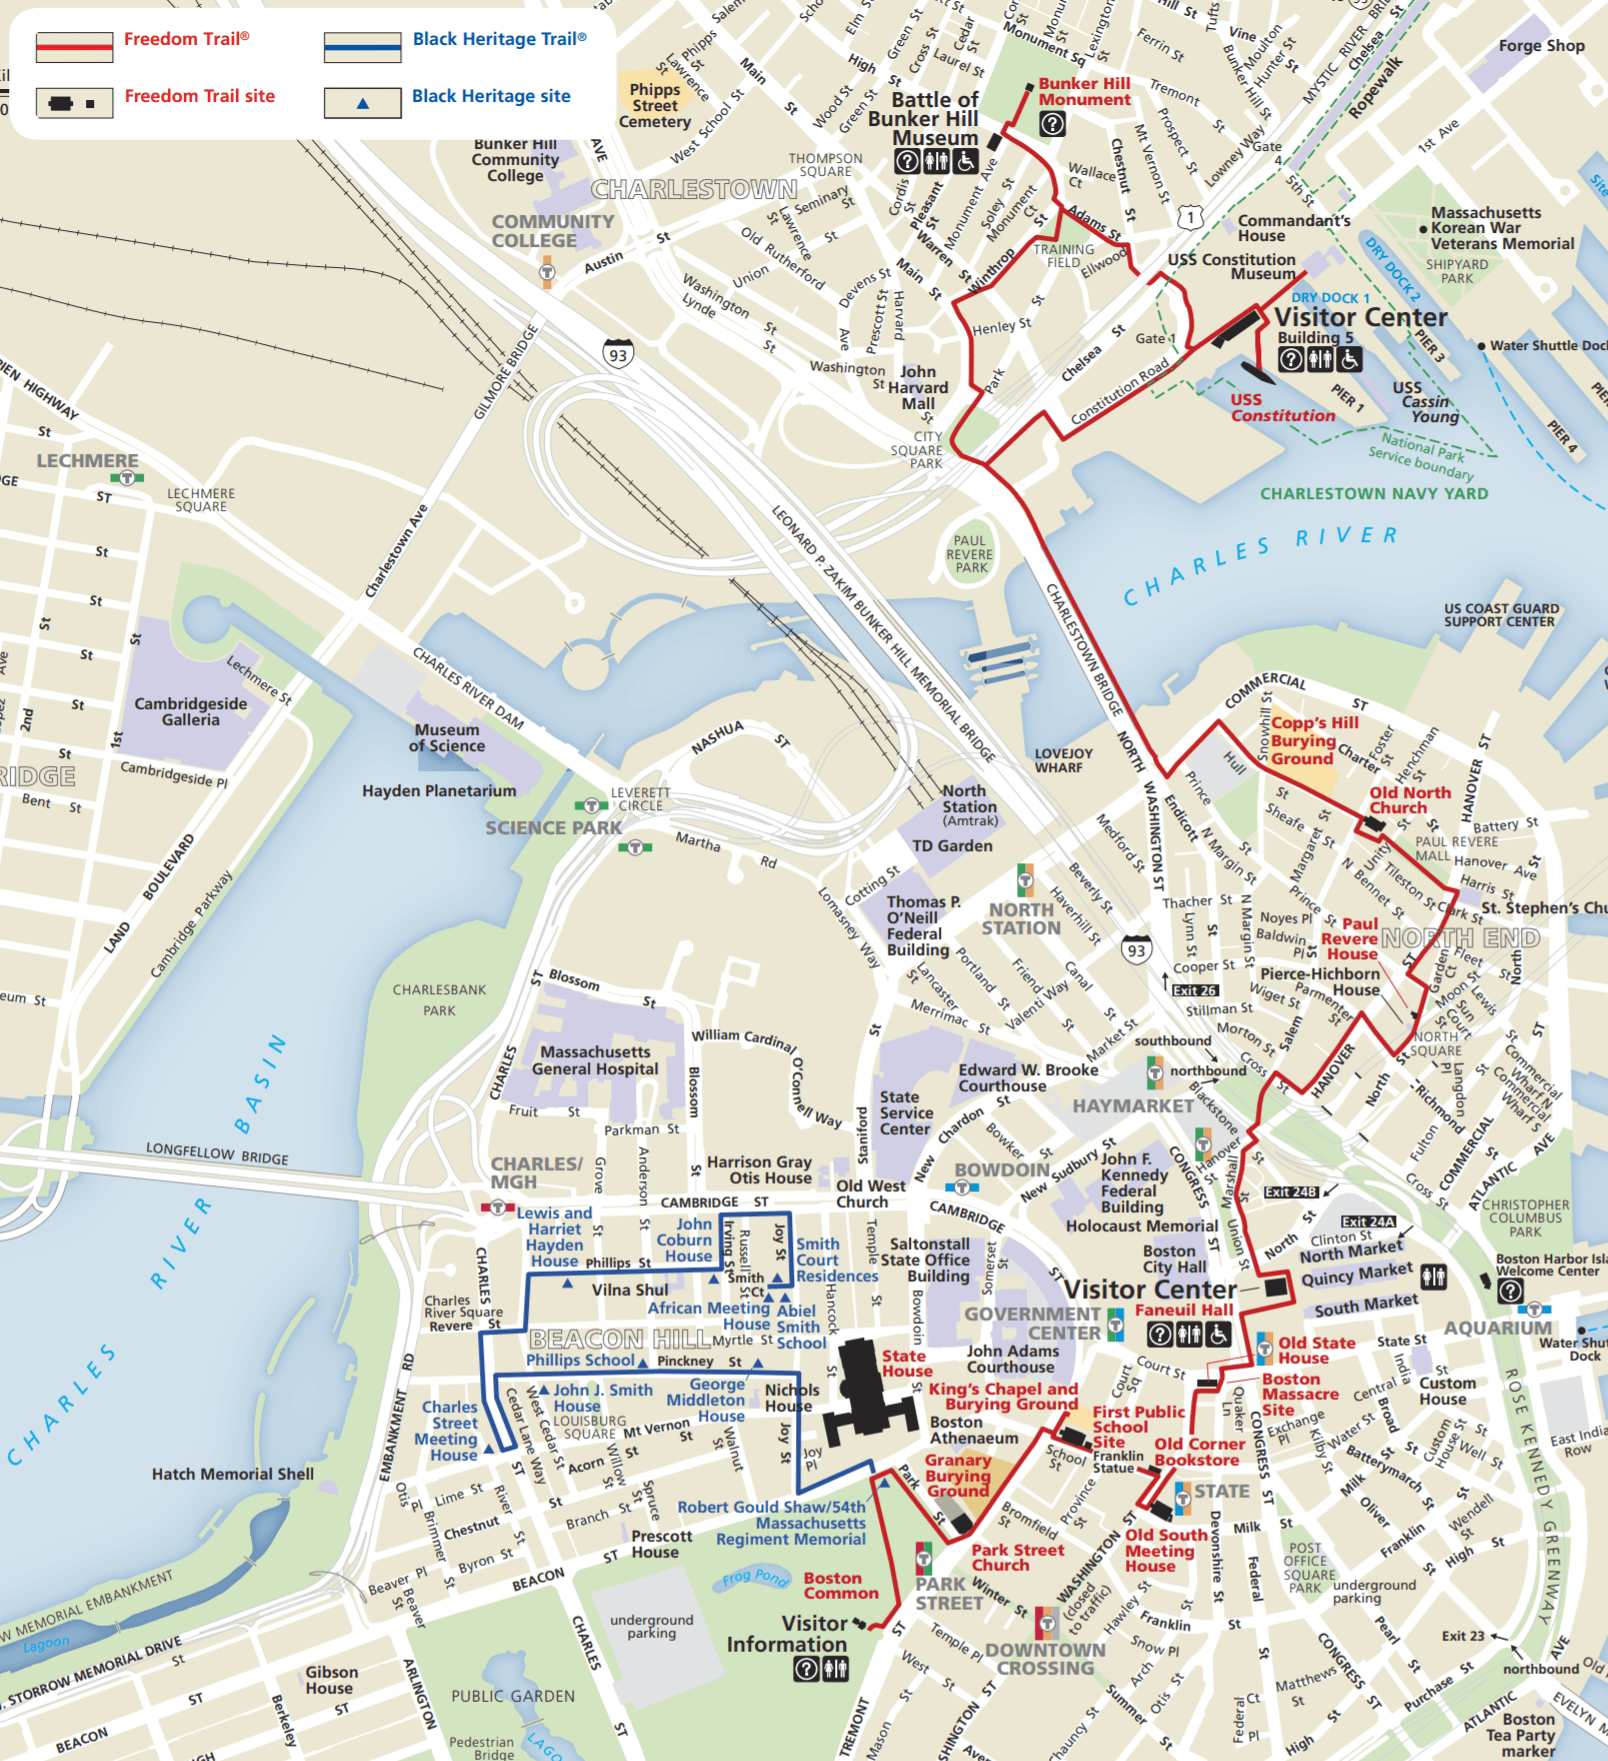 Find trail stops, map, audio tour and more! Boston S Freedom Trail In Winter What To See What Is Closed And What Is Still Awesome Even In The Cold Simply Awesome Trips